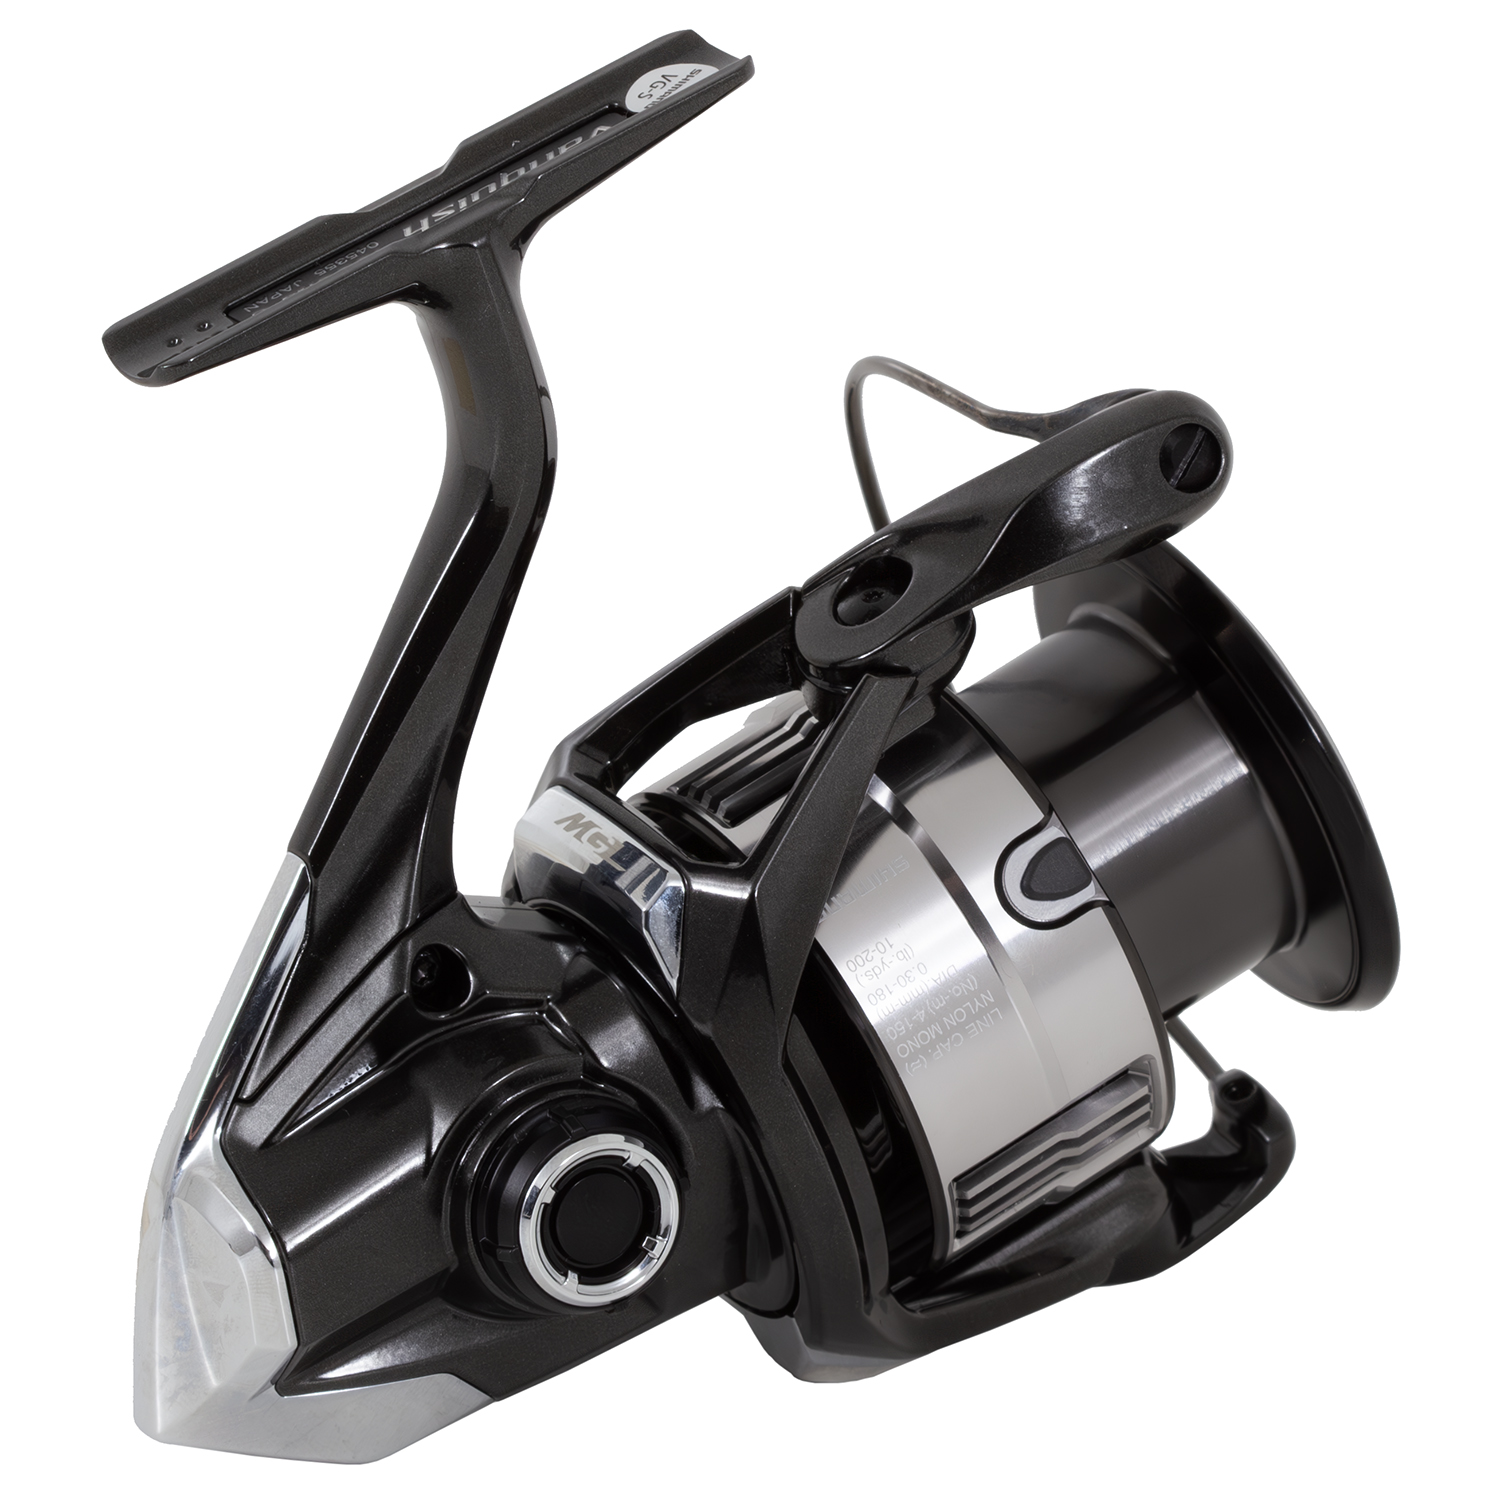 The ULTIMATE LIGHTEST Reel - 2023 Shimano Vanquish Review 